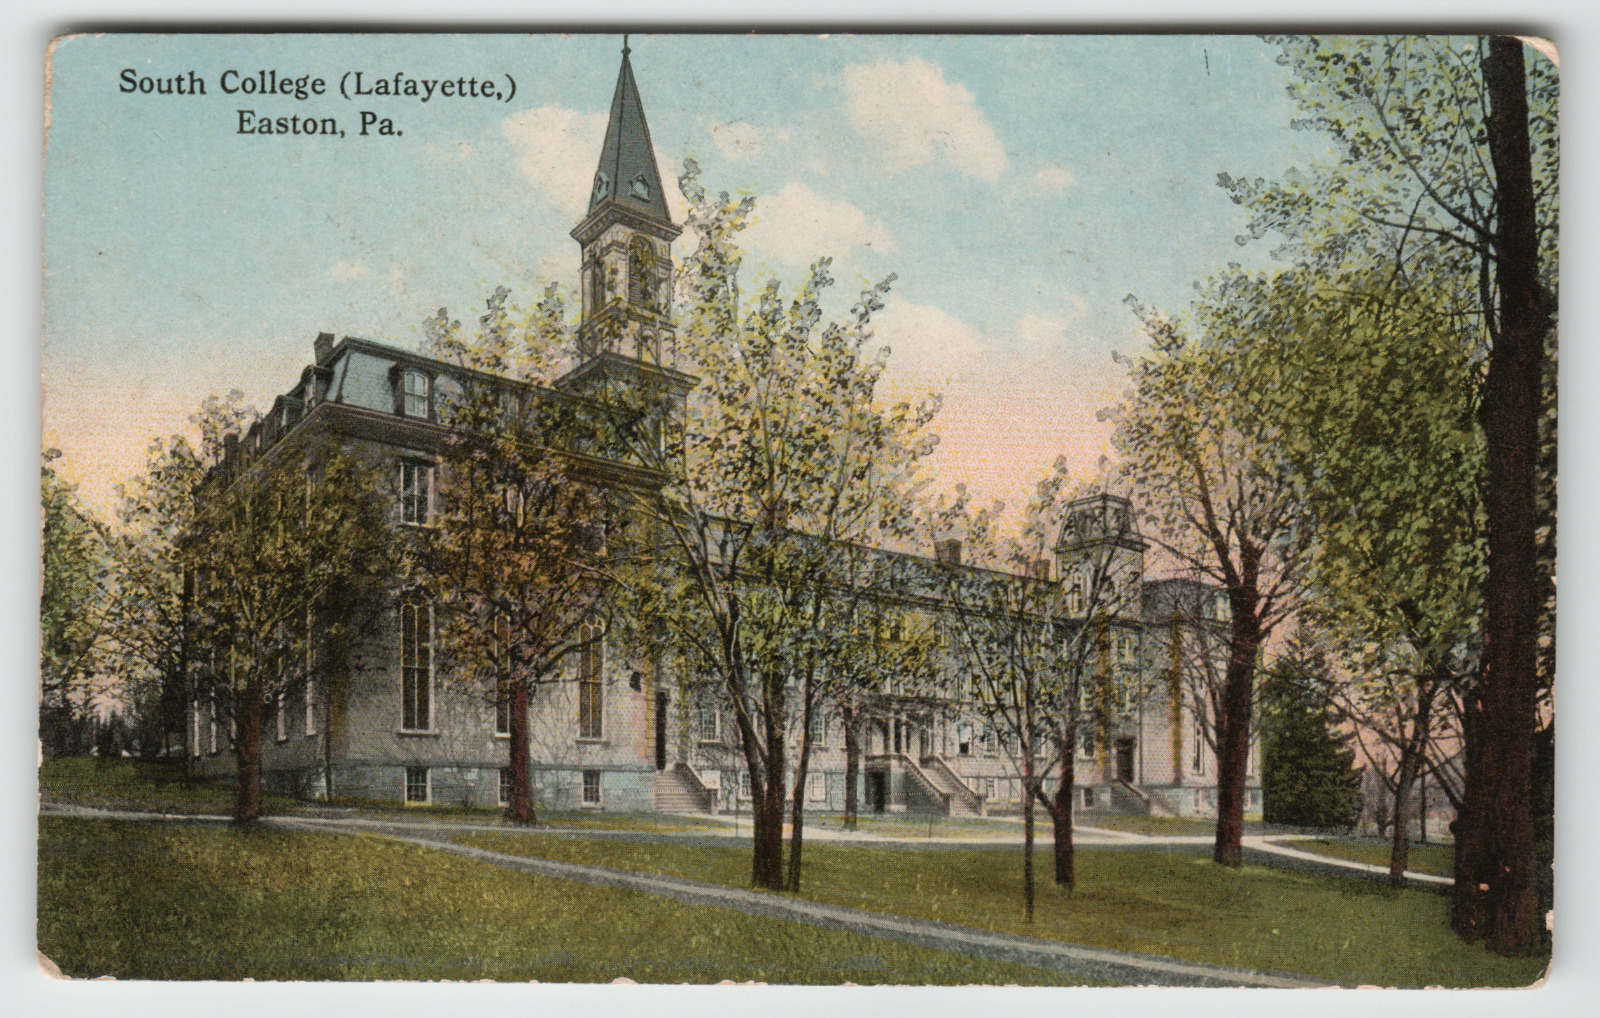 Postcard Vintage South College Lafayette in Easton, PA